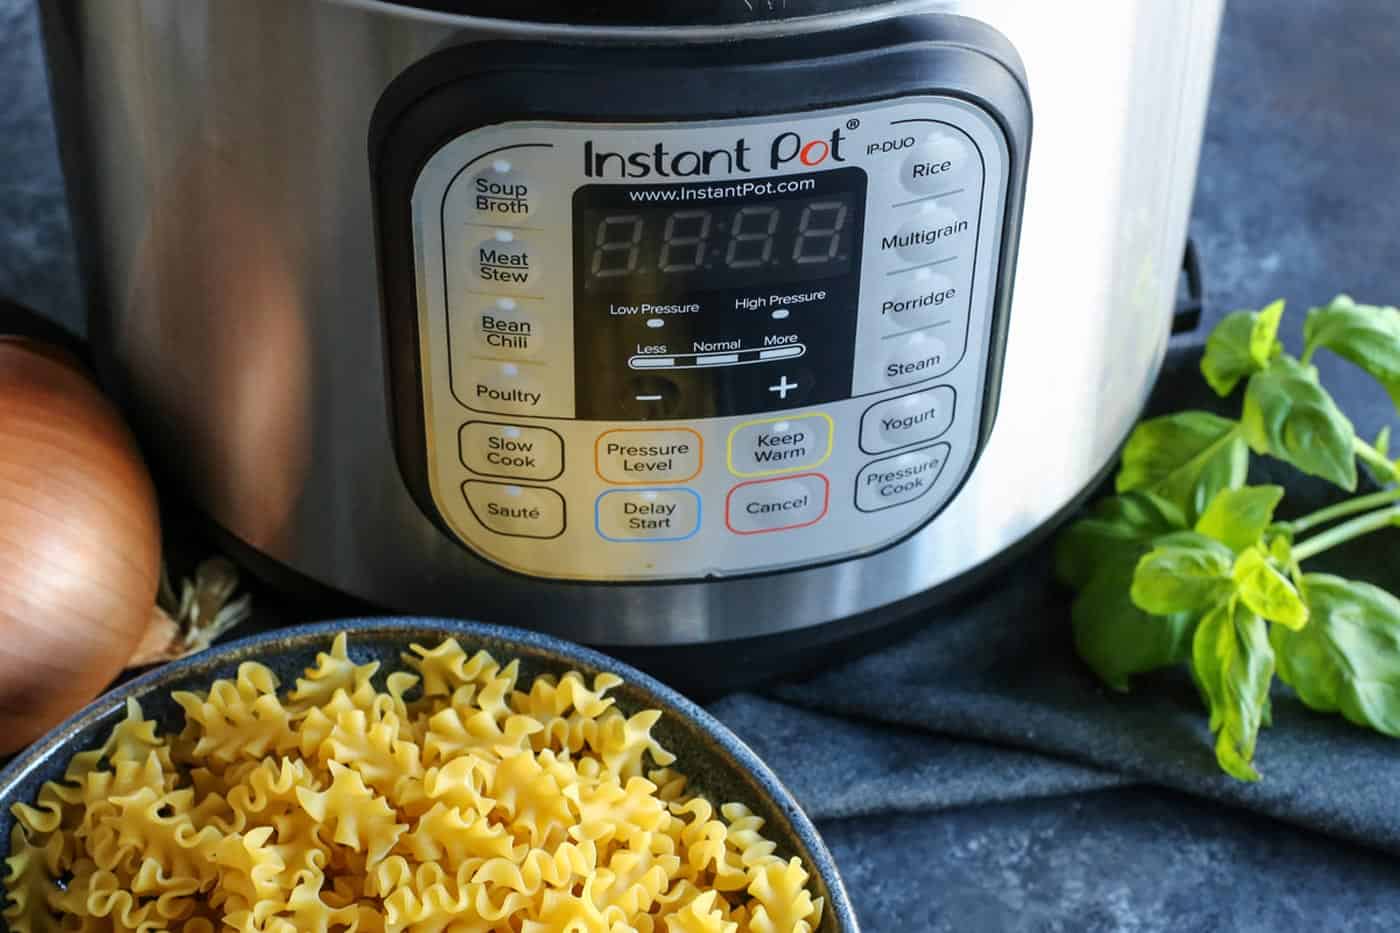 An instant pot next to a bowl of malfalda noodles